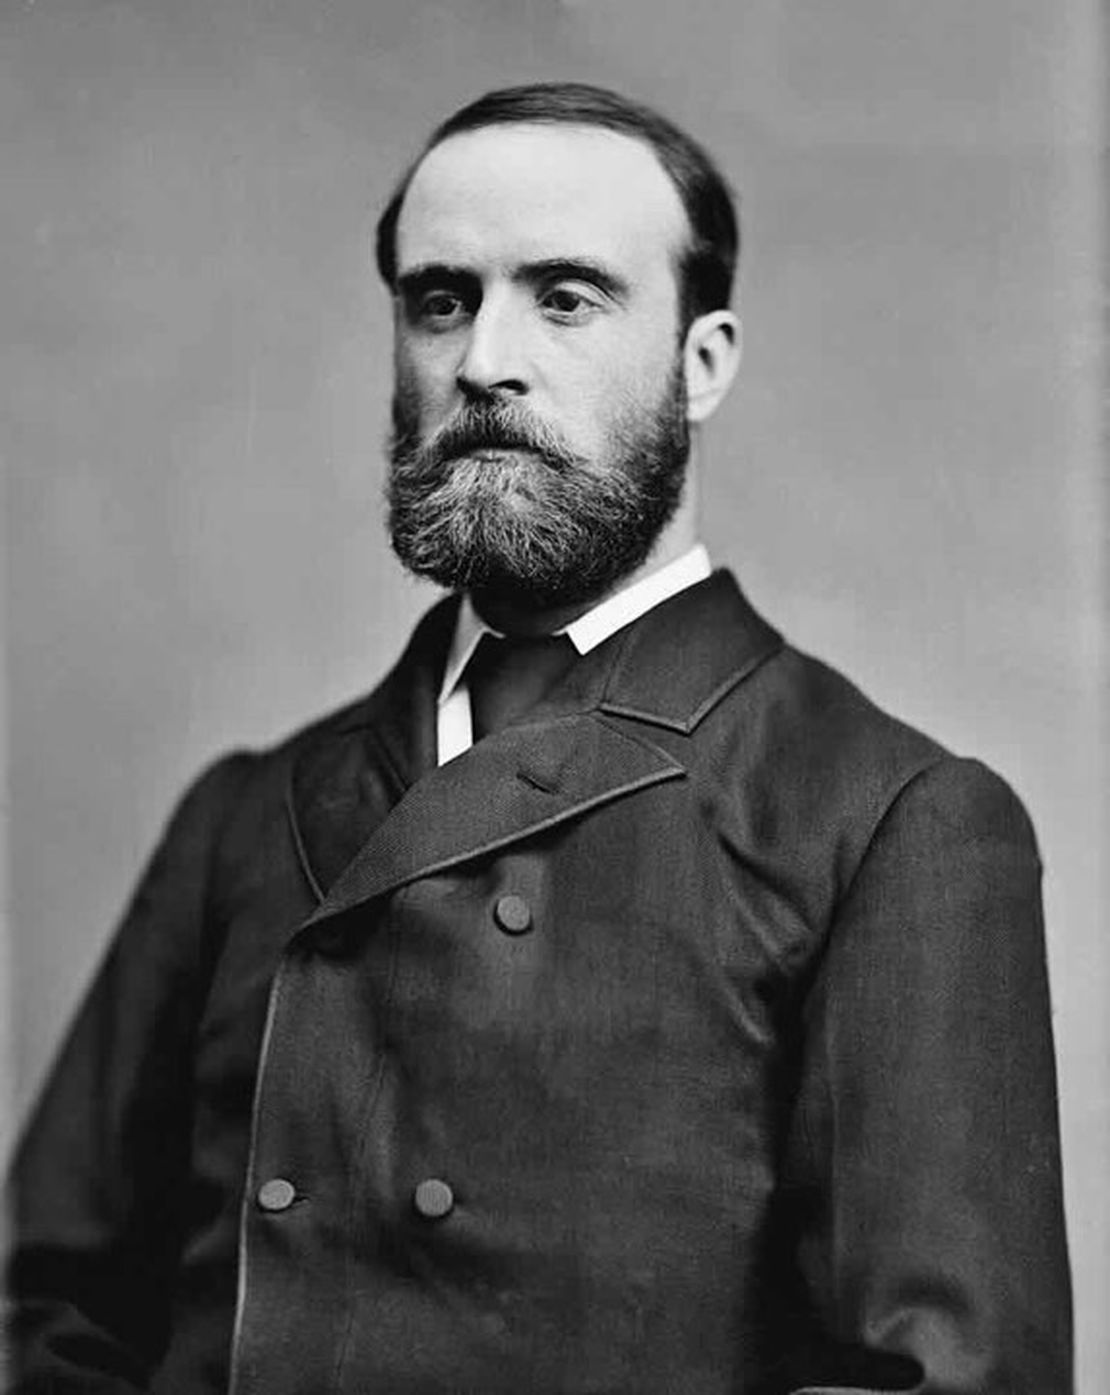 Charles S. Parnell addresses the U.S. Congress